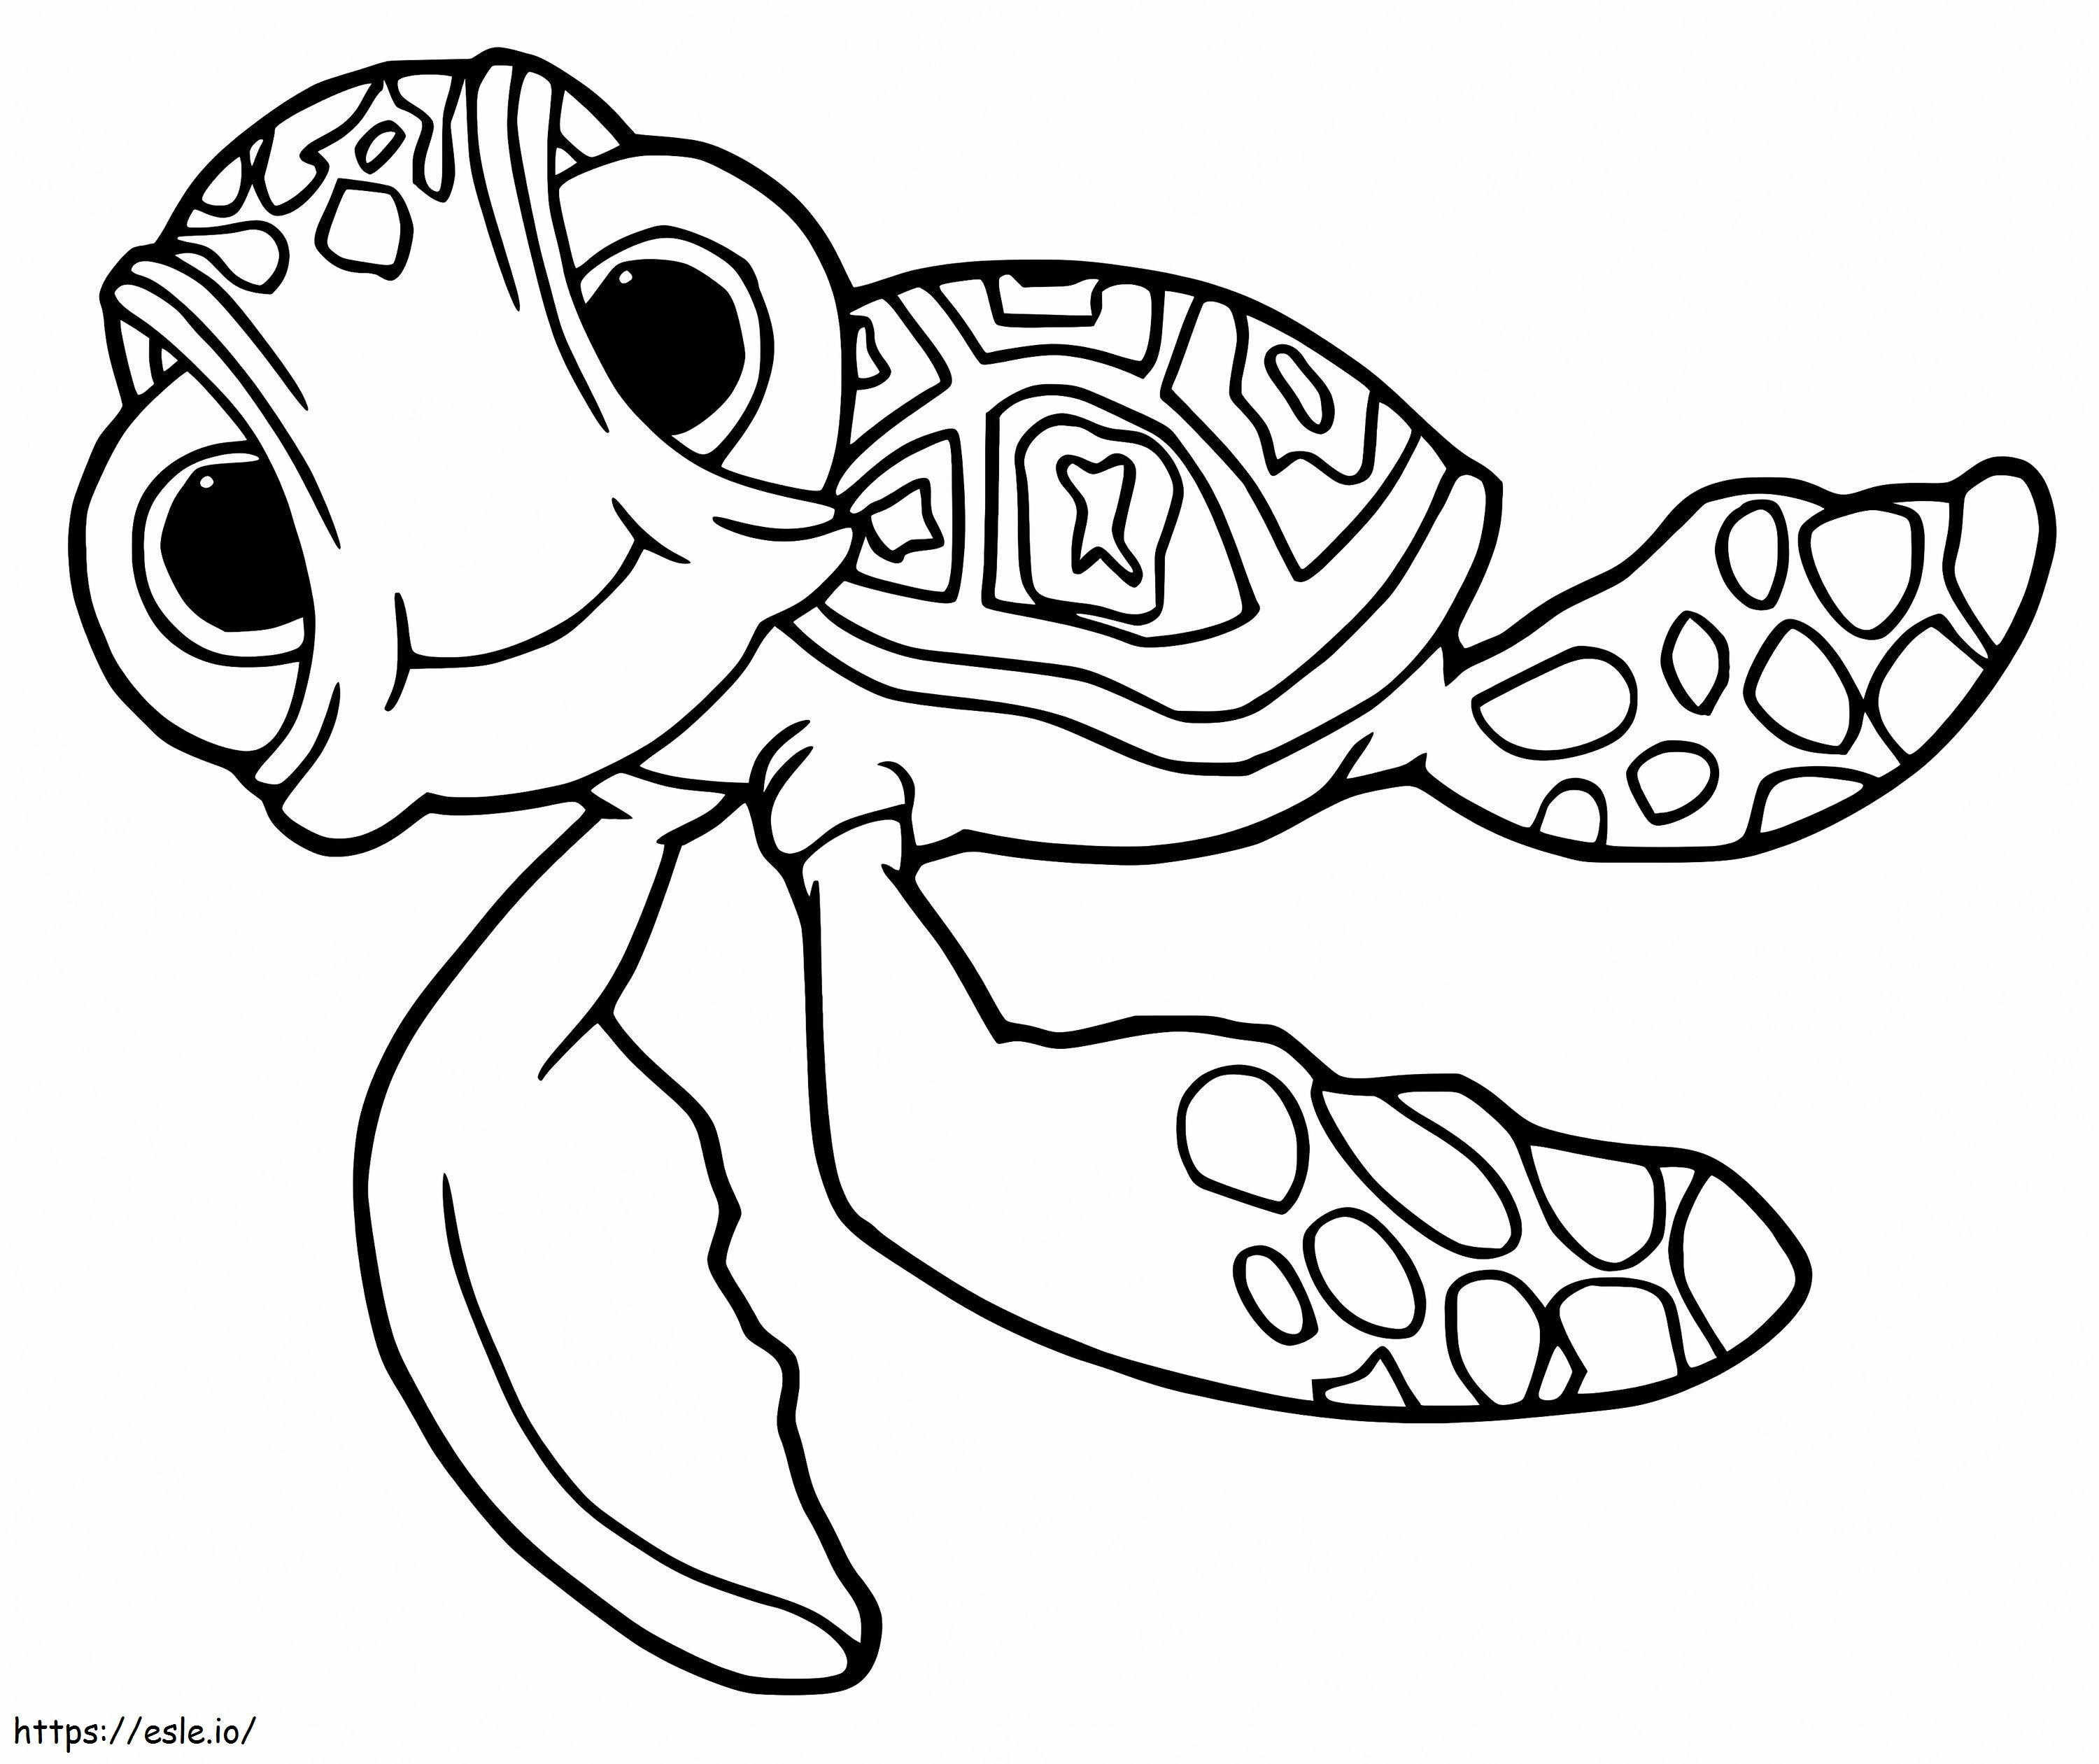 Adorable Squirt coloring page